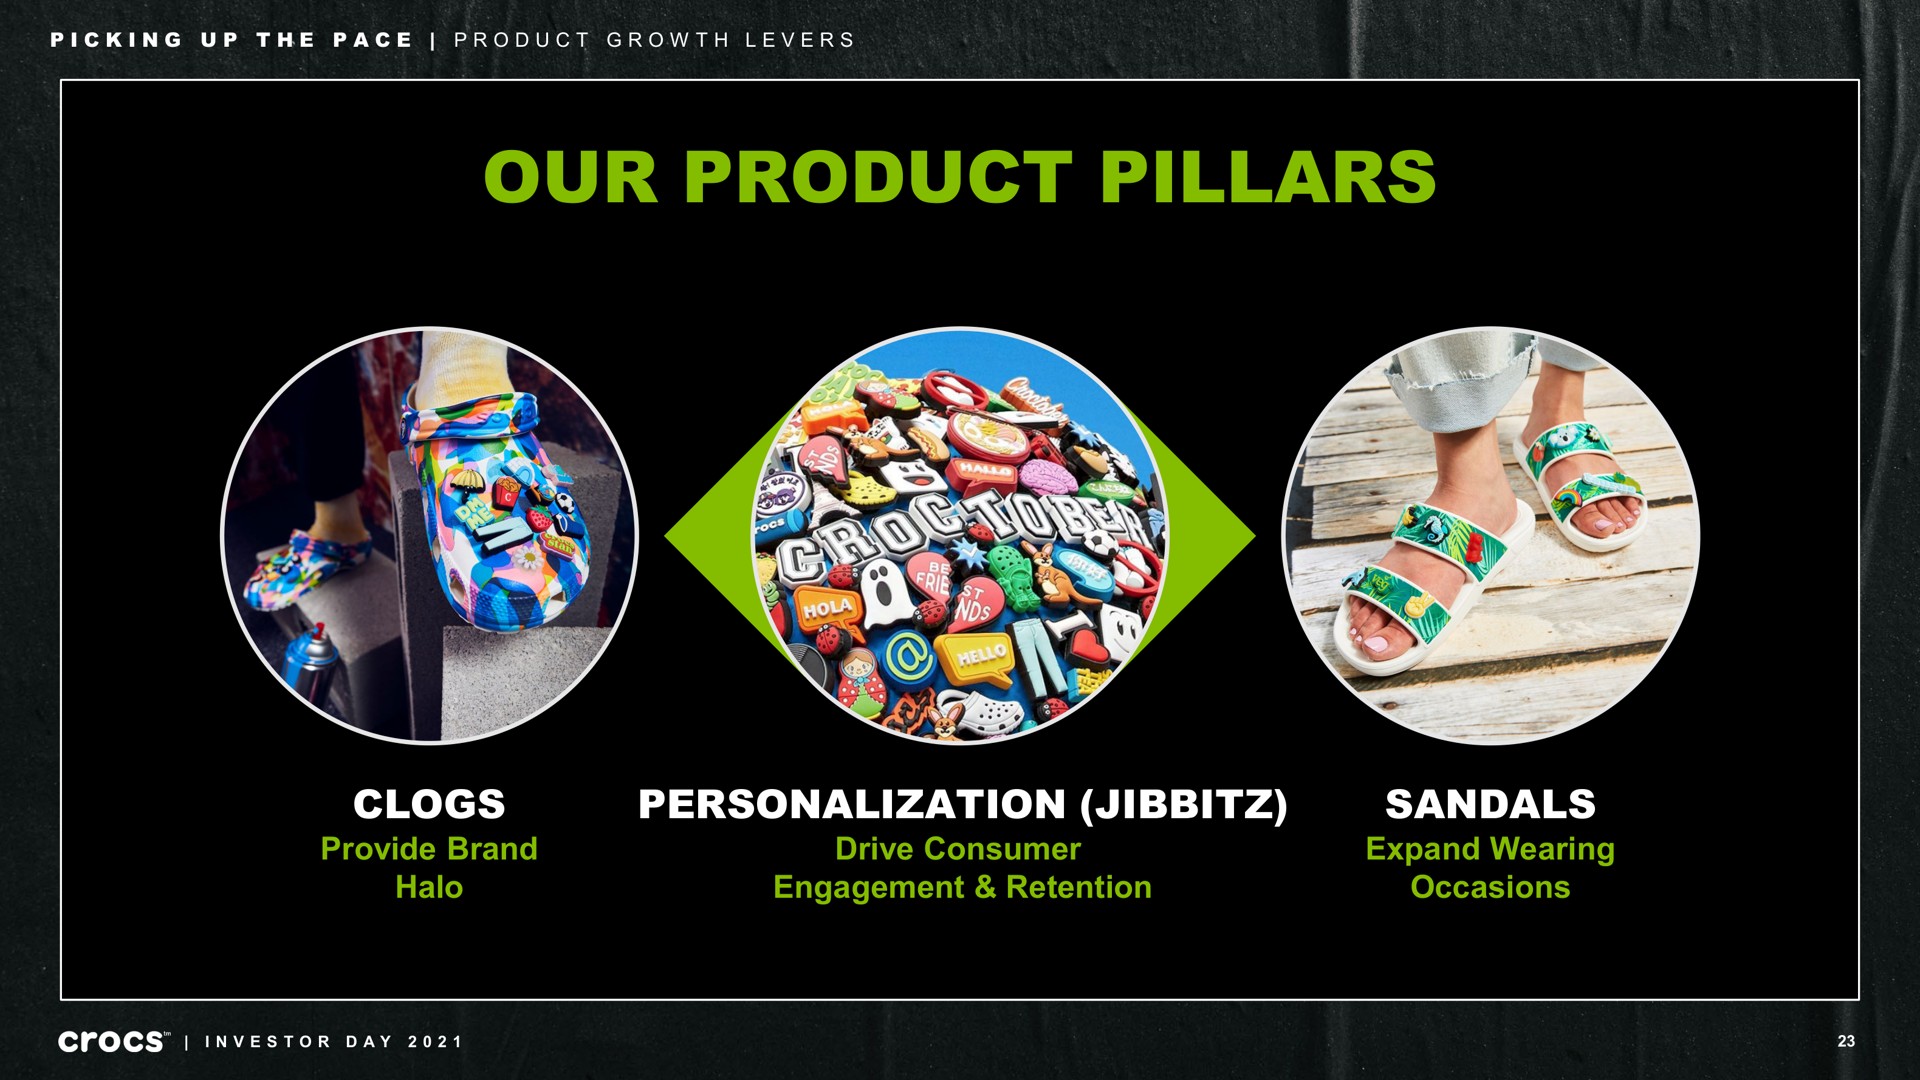 our product pillars clogs provide brand halo personalization drive consumer engagement retention sandals expand wearing occasions picking up the pace growth levers investor day | Crocs